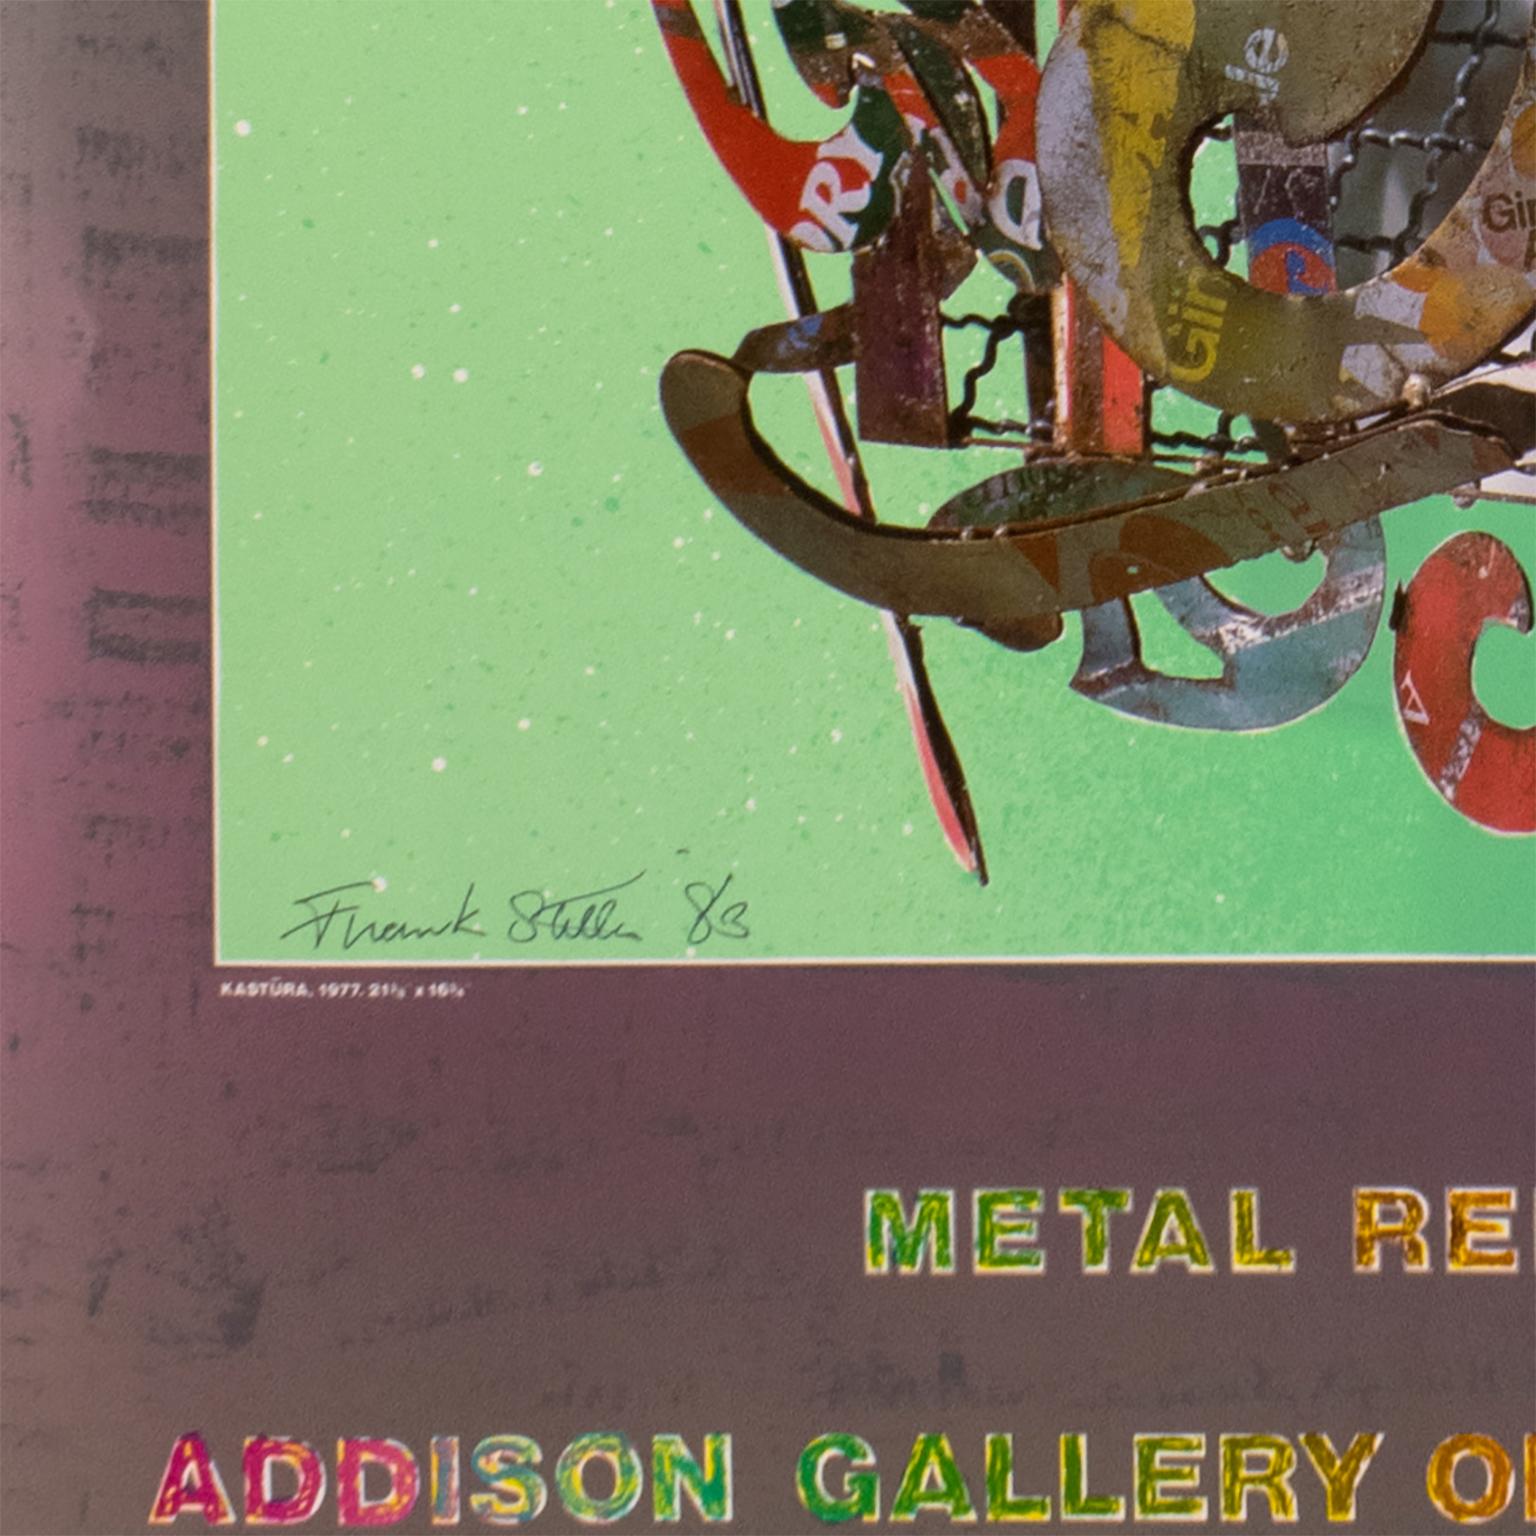 This shimmering, metallic vintage poster with rainbow text and layers of texture must be seen in person to appreciate Frank Stella's masterful design.  Original exhibition poster for Frank Stella’s Metal Reliefs exhibition at the Addison Gallery of